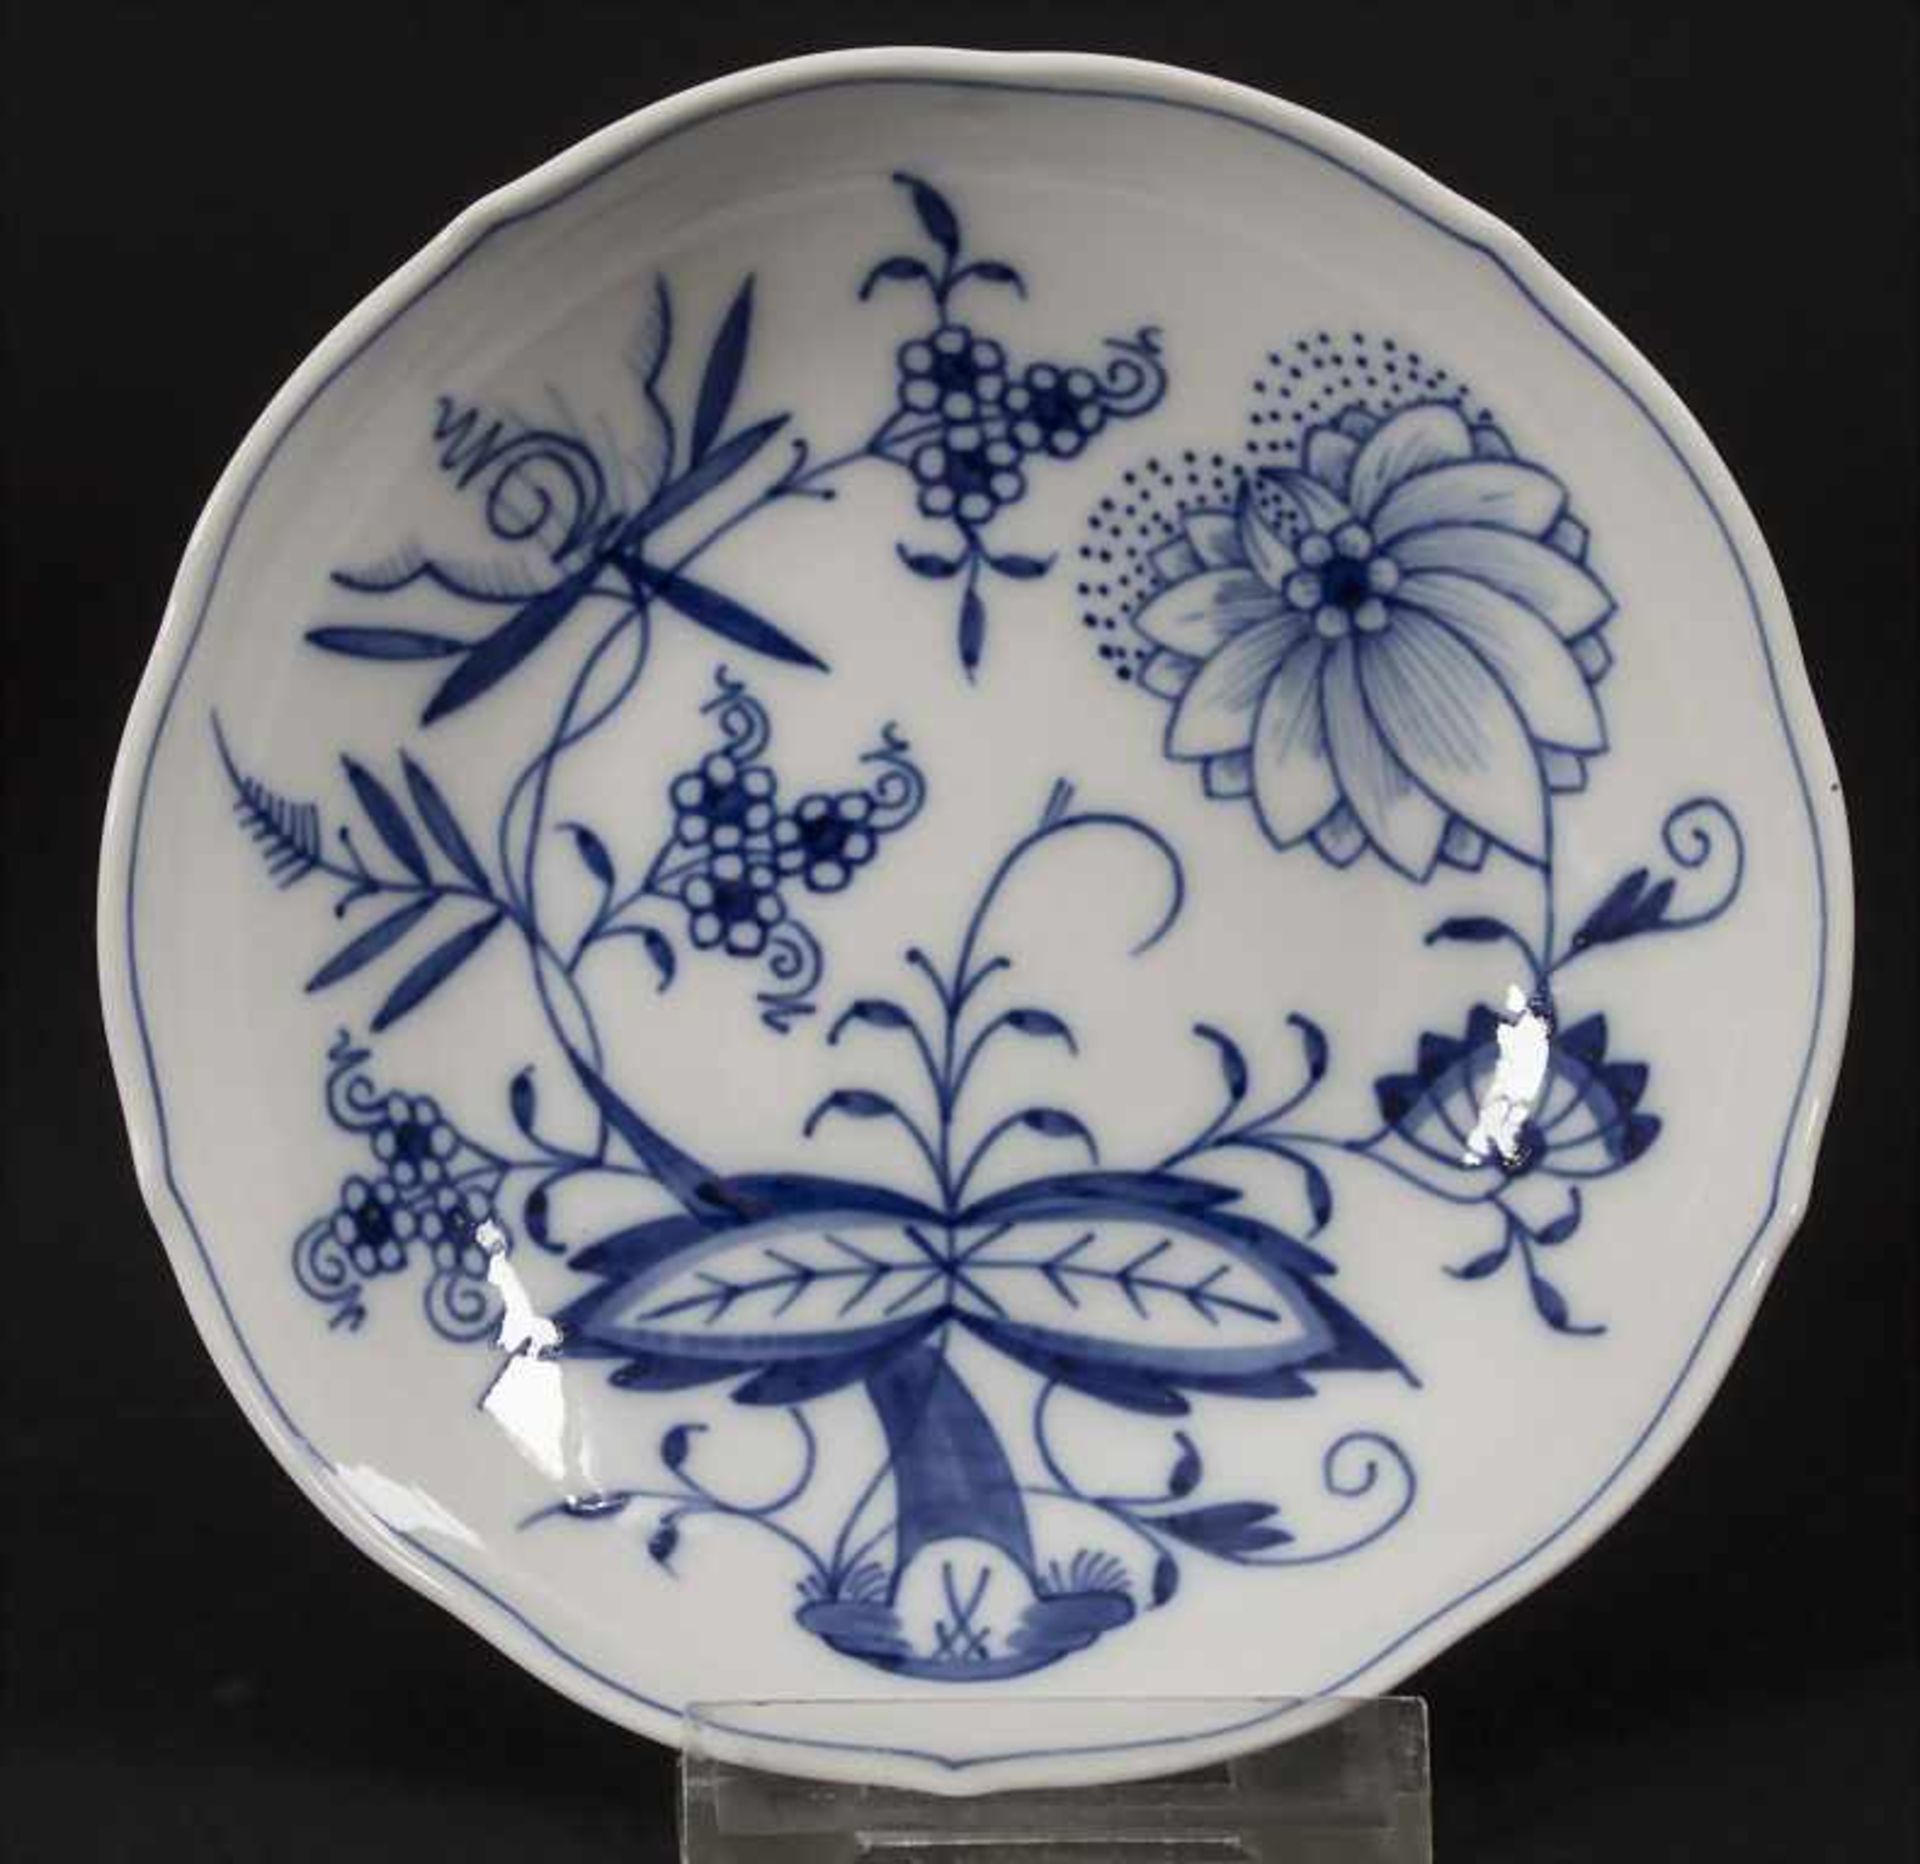 28 tlg. Service 'Zwiebelmuster' / A 28-piece dinner set with 'Onion Pattern', Meissen, 20. Jh. - Image 2 of 17